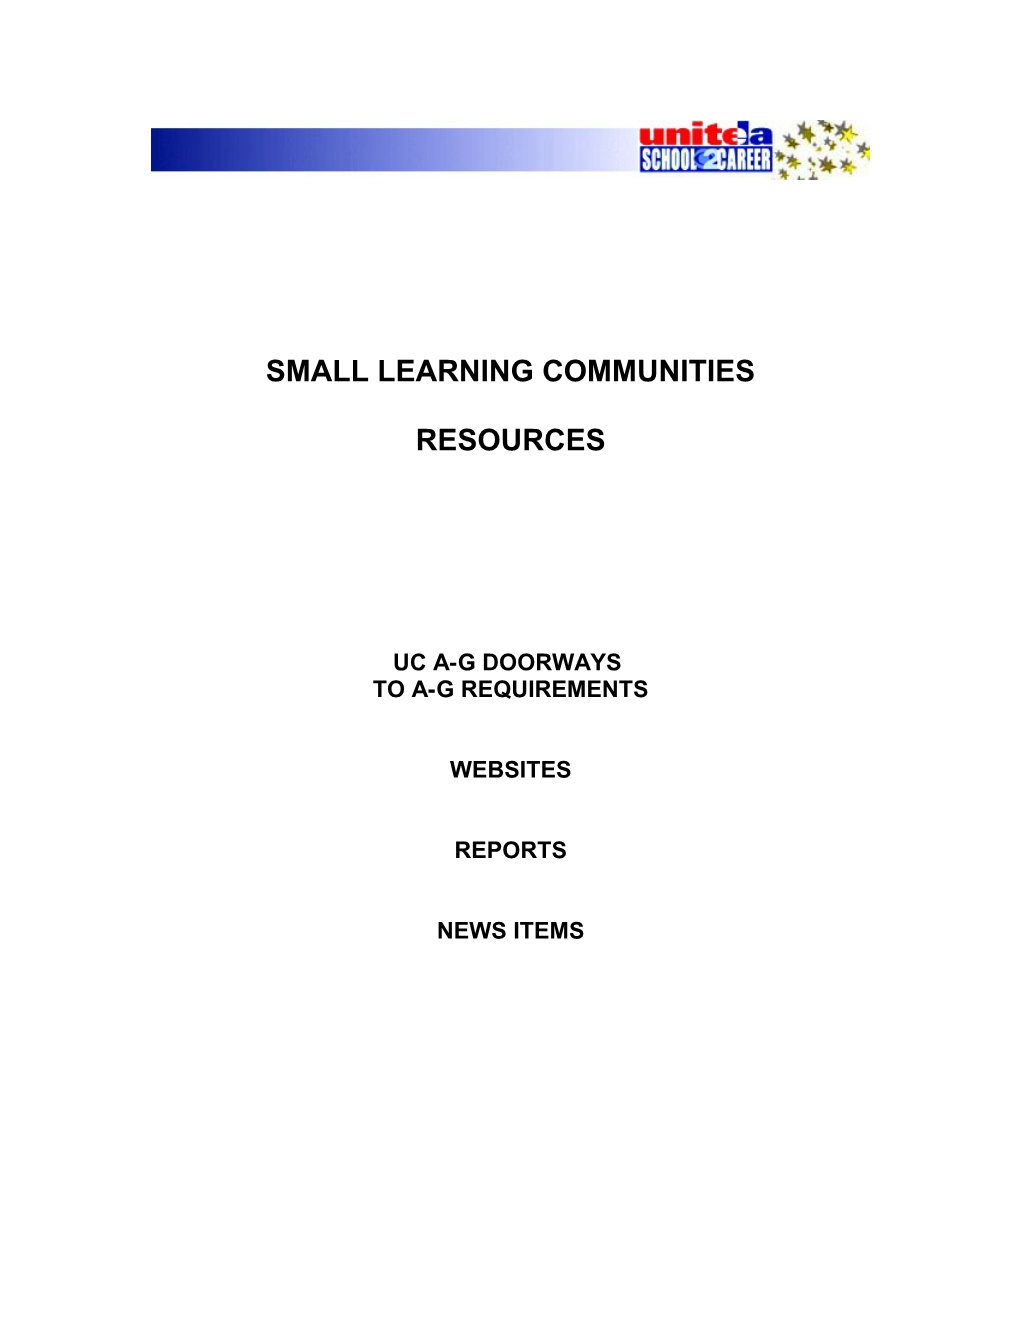 Small Learning Communities